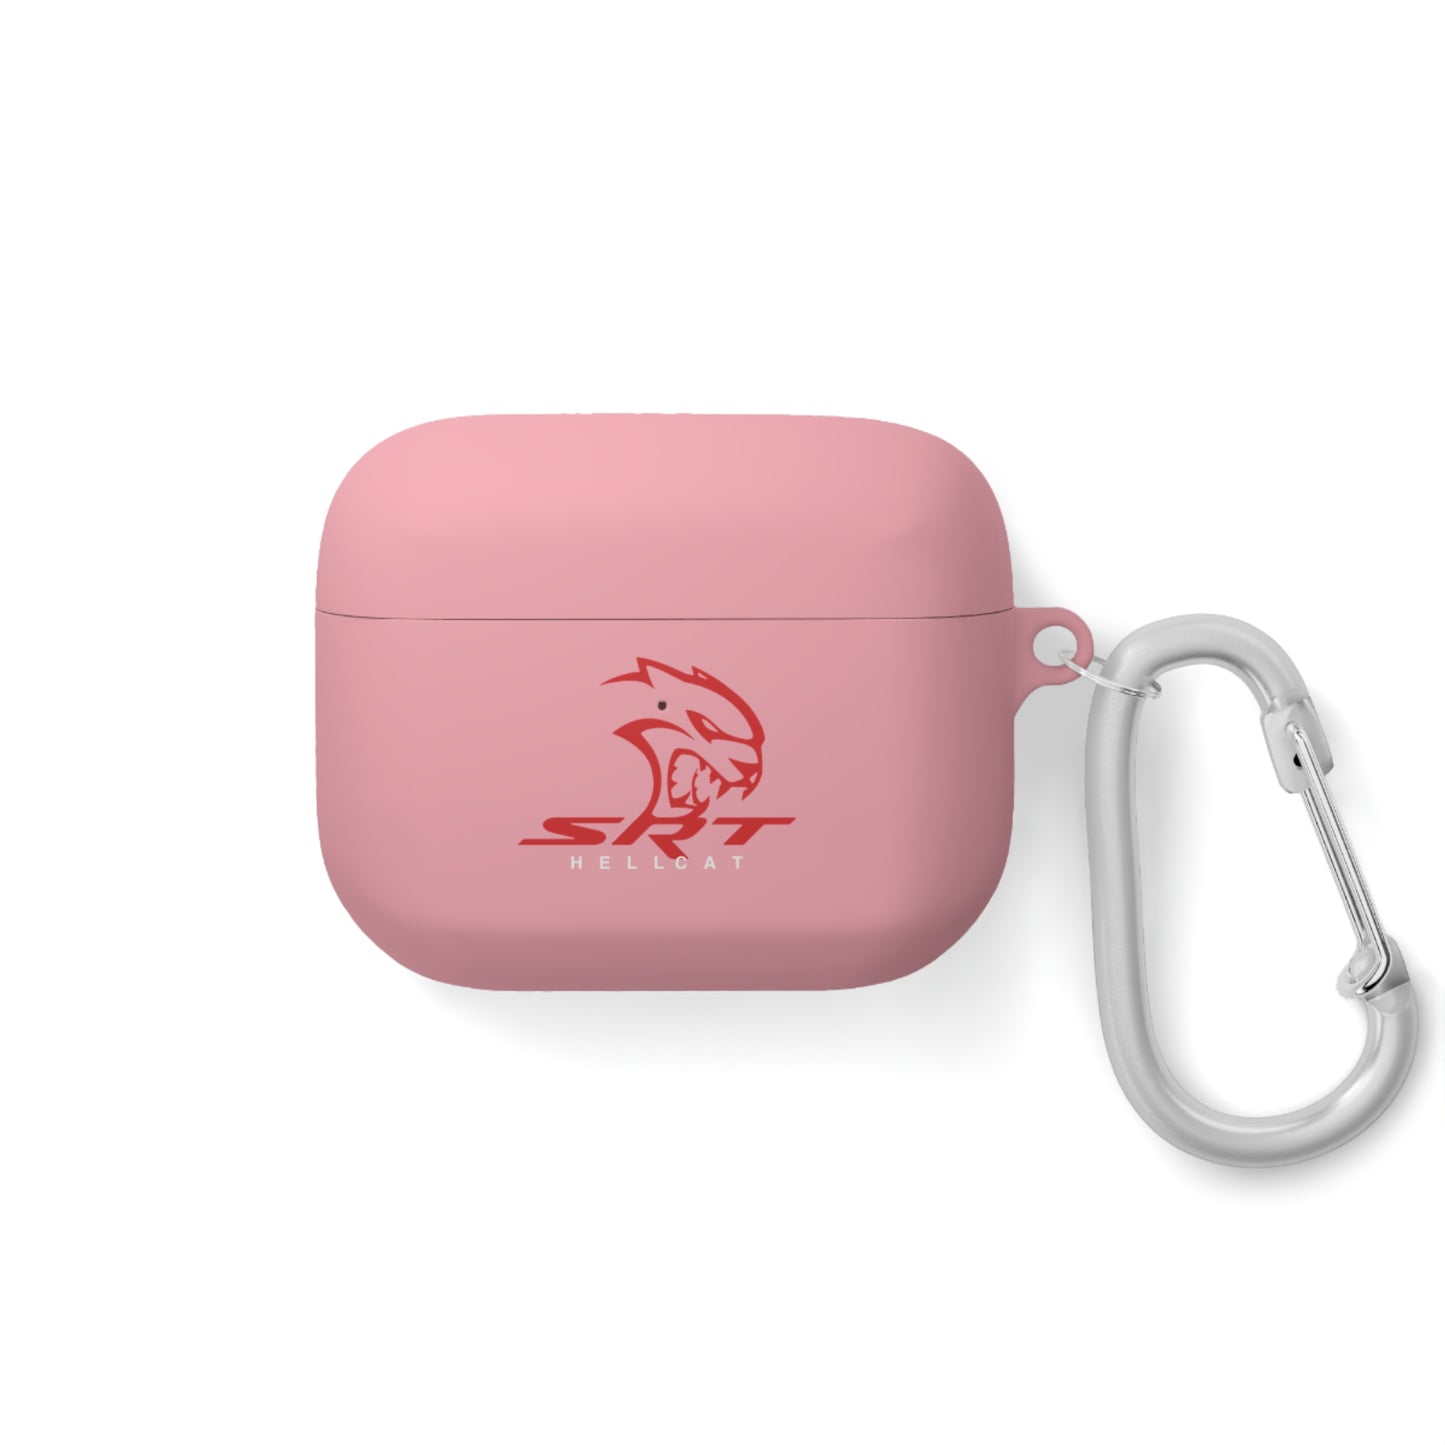 SRT Hellcat Silhouette Edition: Premium AirPods Case for Style and Protection